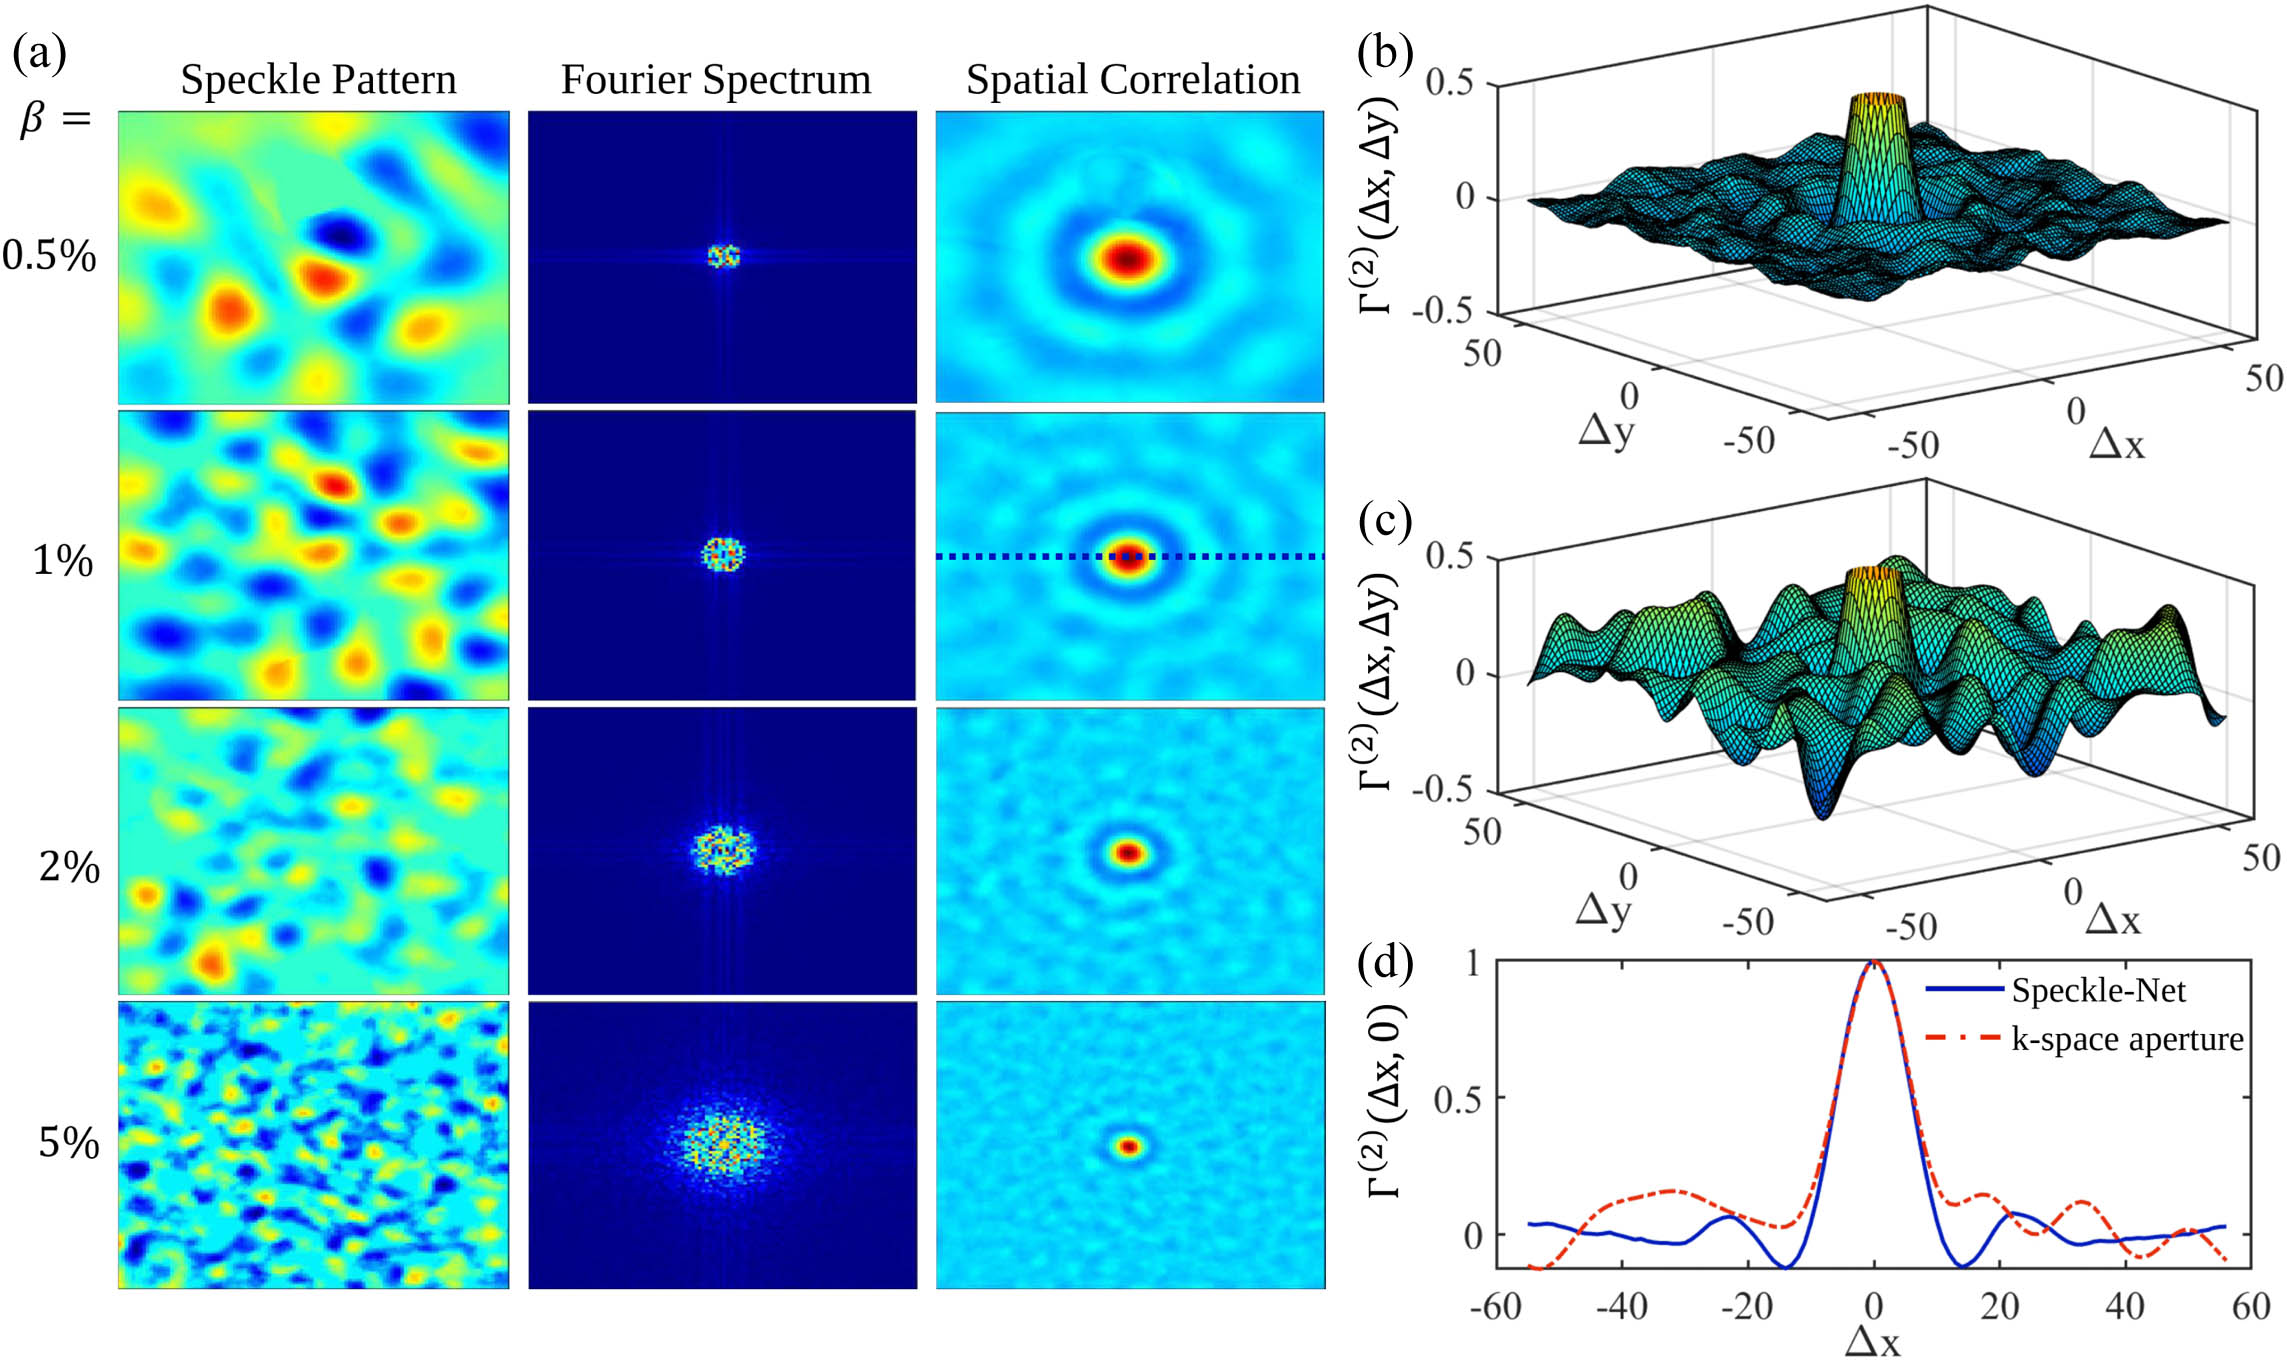 (a) Left column: speckle patterns after three-branch Speckle-Net training with β=5%,2%,1%, and 0.5%. Middle column: Fourier spectra of the corresponding patterns (frequency components fx and fy increase from the center to edges). Right column: spatial intensity correlation distributions (correlation distance increases from the center to edges). (b) Spatial correlations of patterns with Speckle-Net and β=1%. (c) Spatial correlations (β=1%) of patterns generated by the diffuser plate. A k-space aperture is applied at the Fourier plane of patterns to control the correlation width the same as in (b). (d) Comparison between two methods with 1D plot along the dashed line marked in (a).